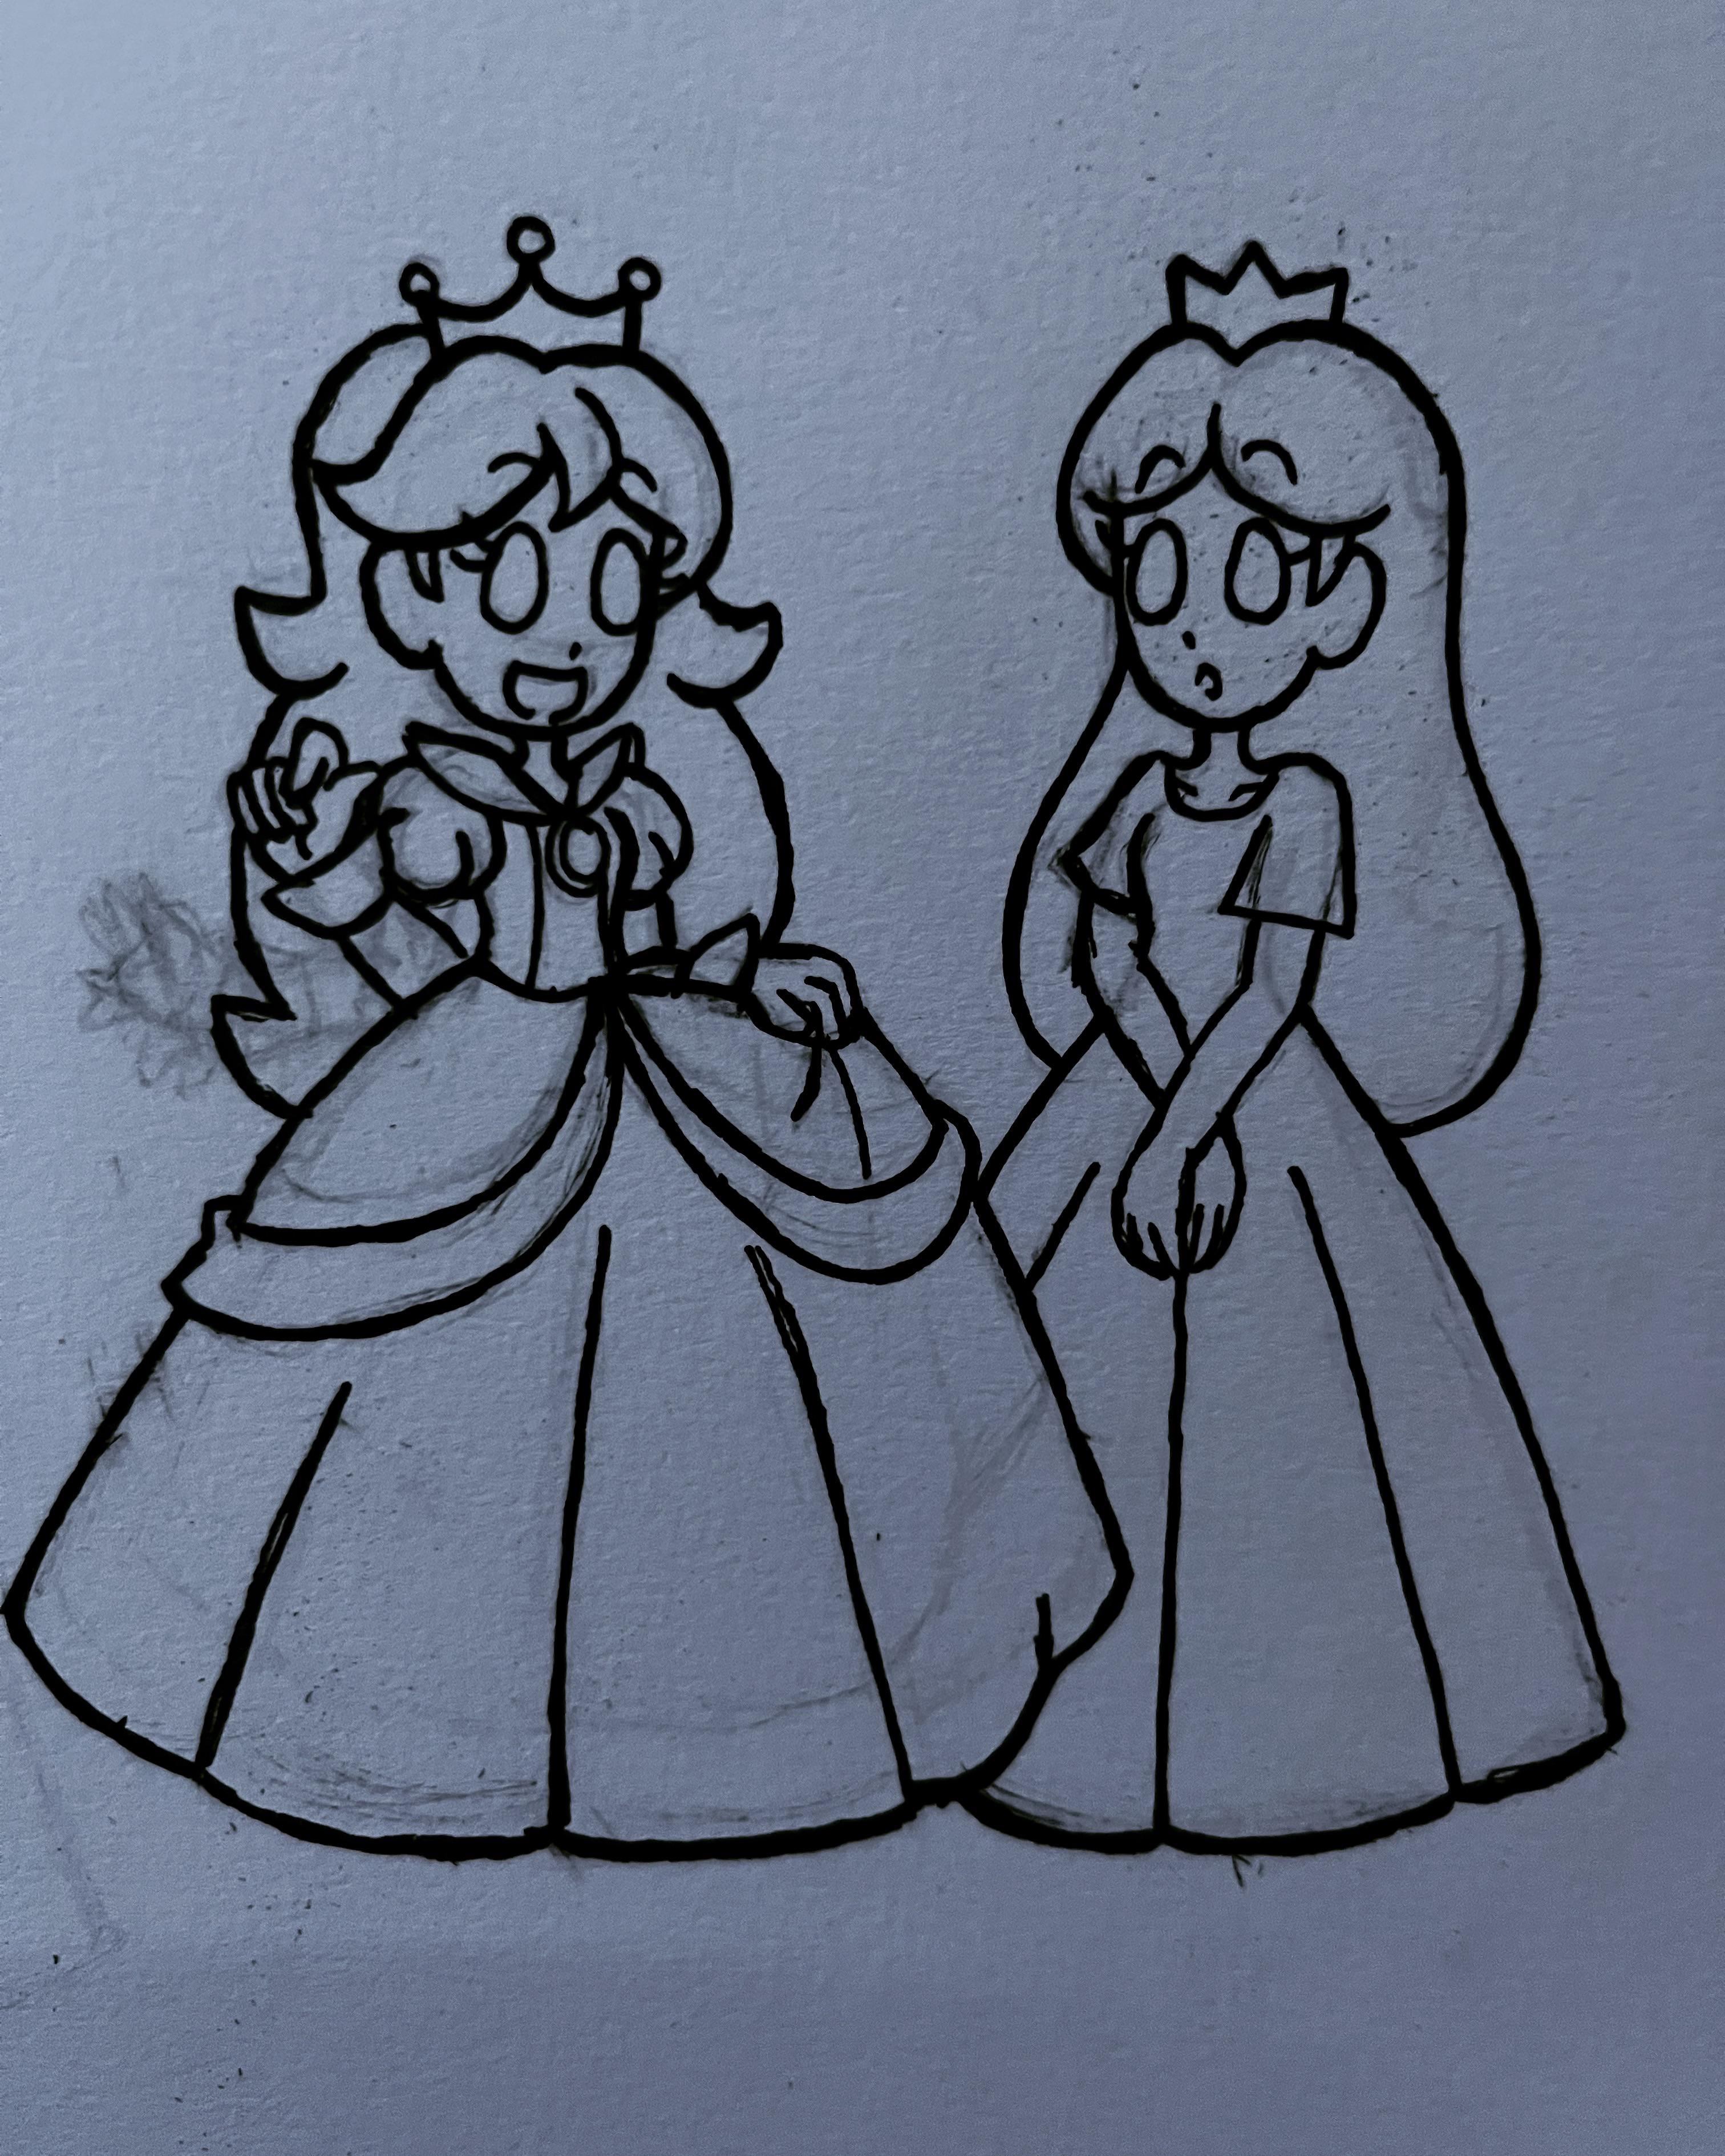 Sketch of prototype peach and in